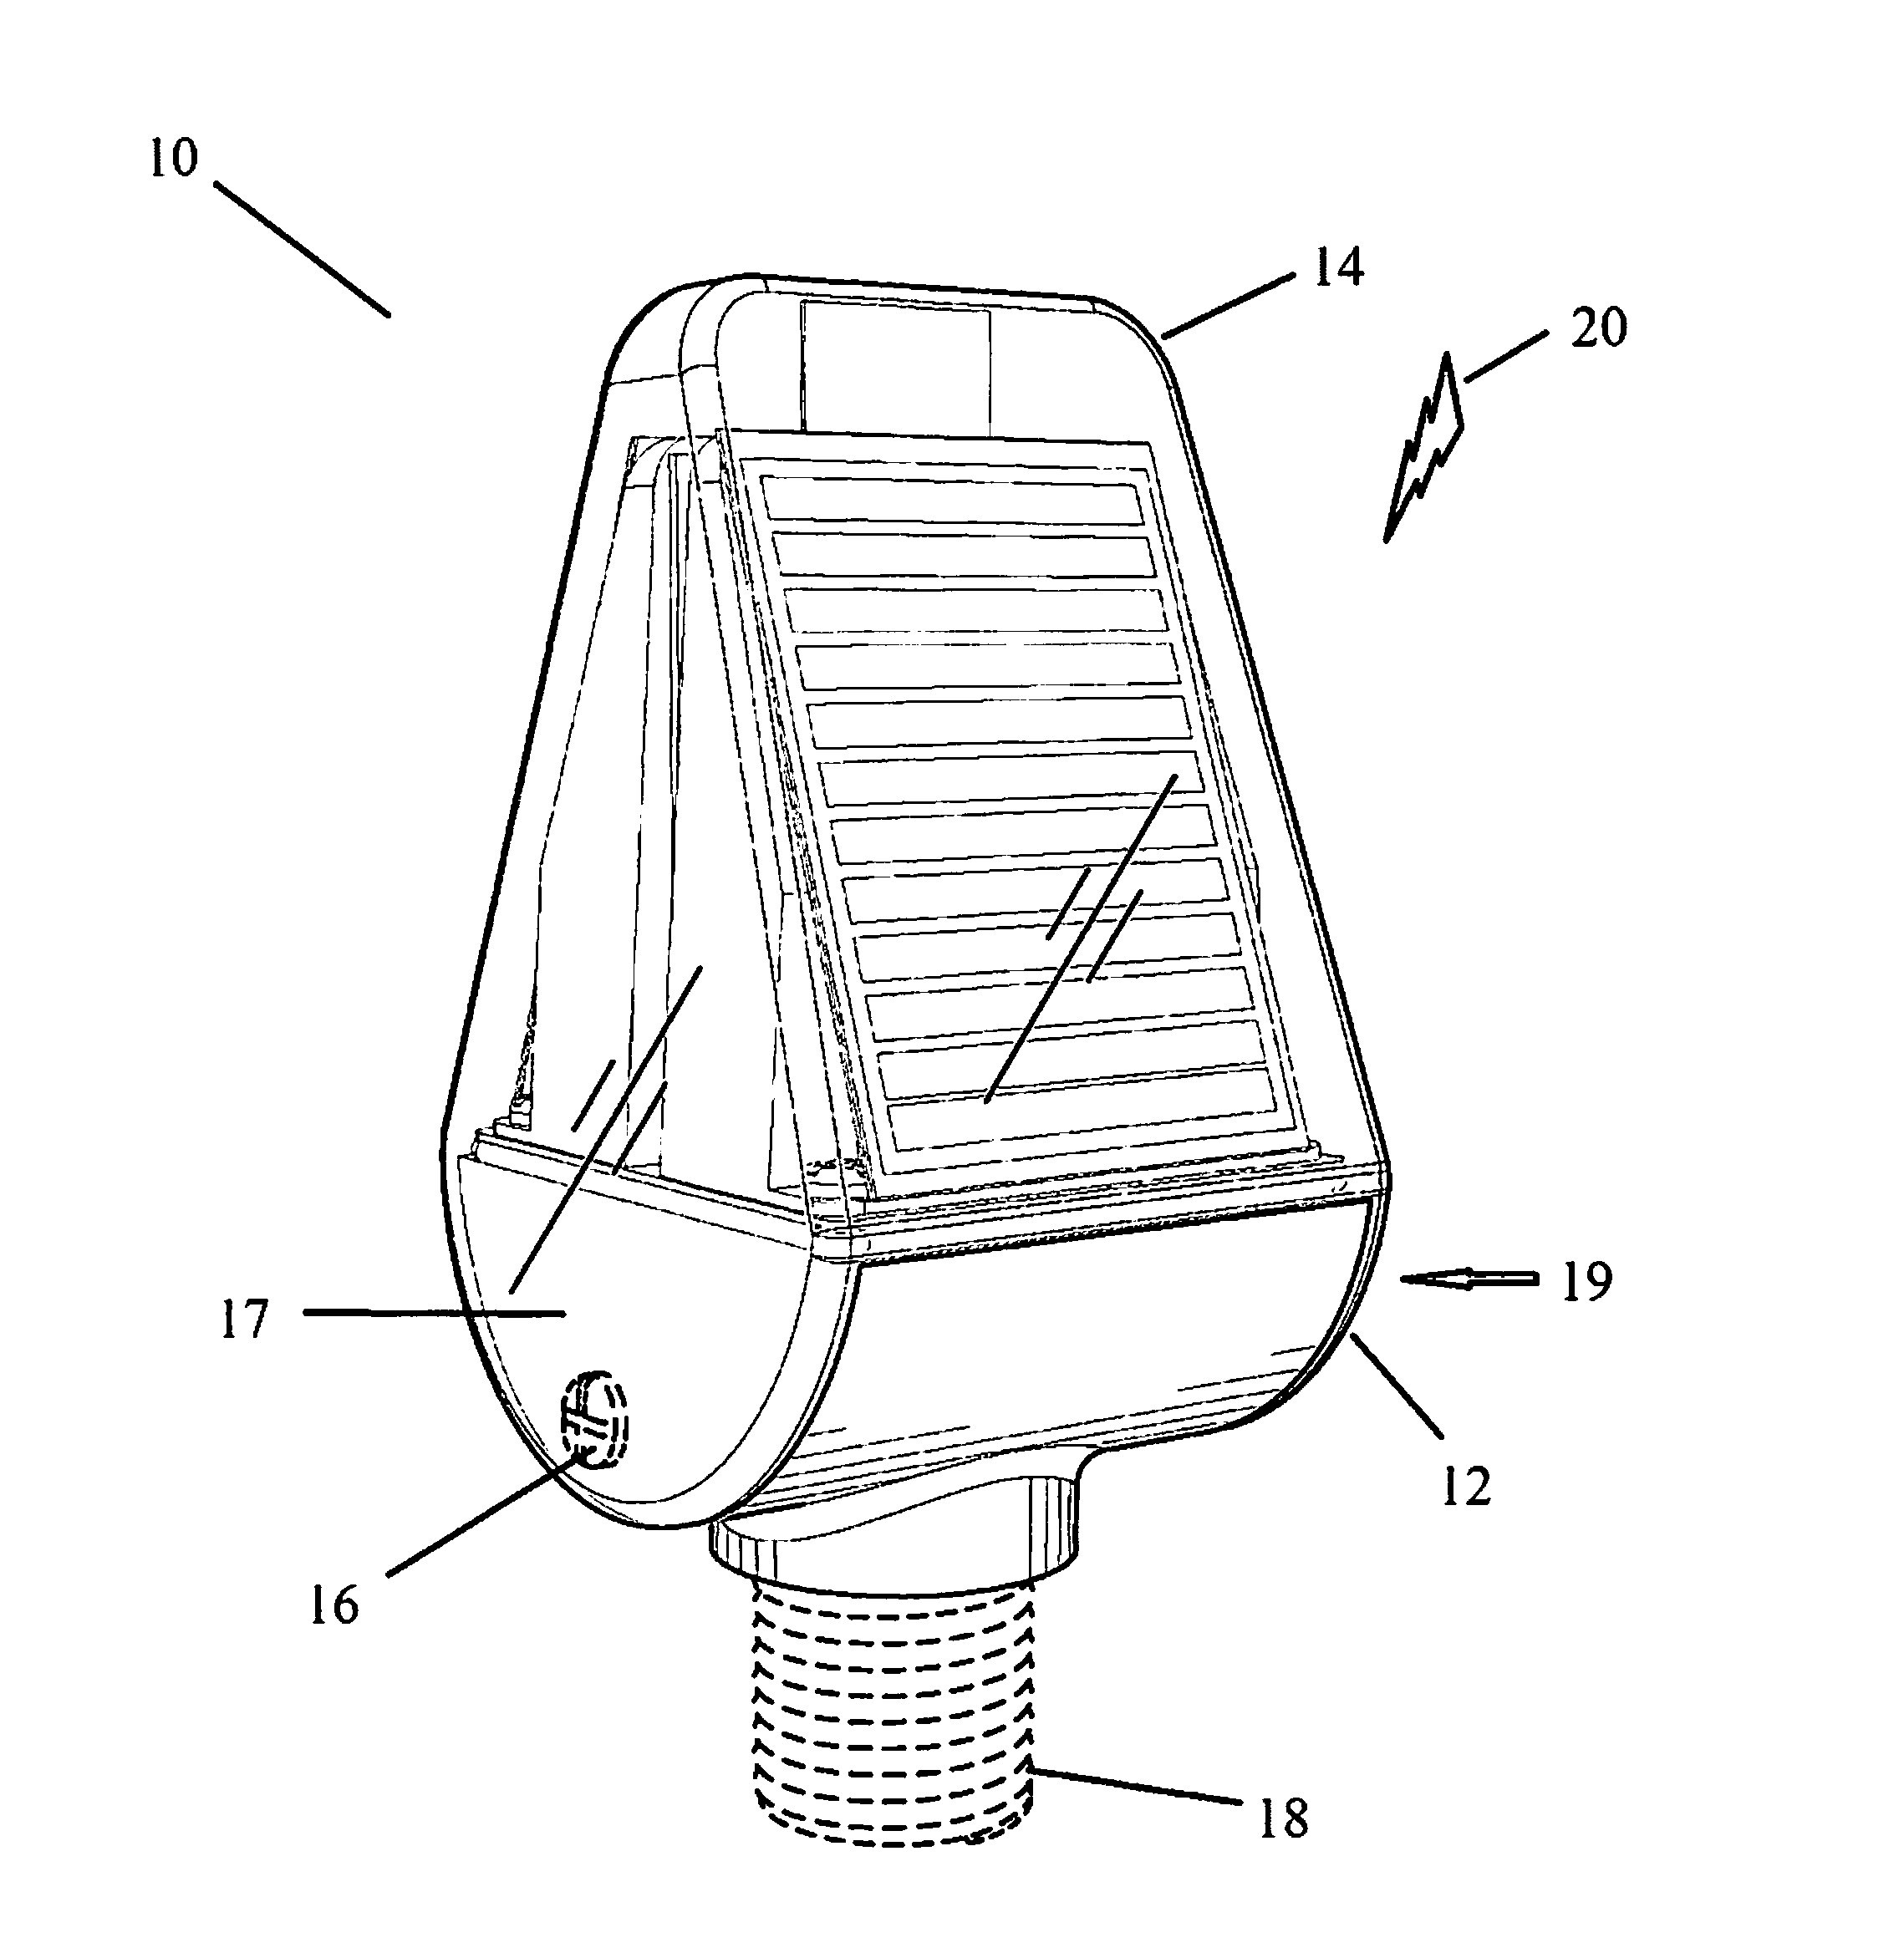 Remote sensing device and system for agricultural and other applications